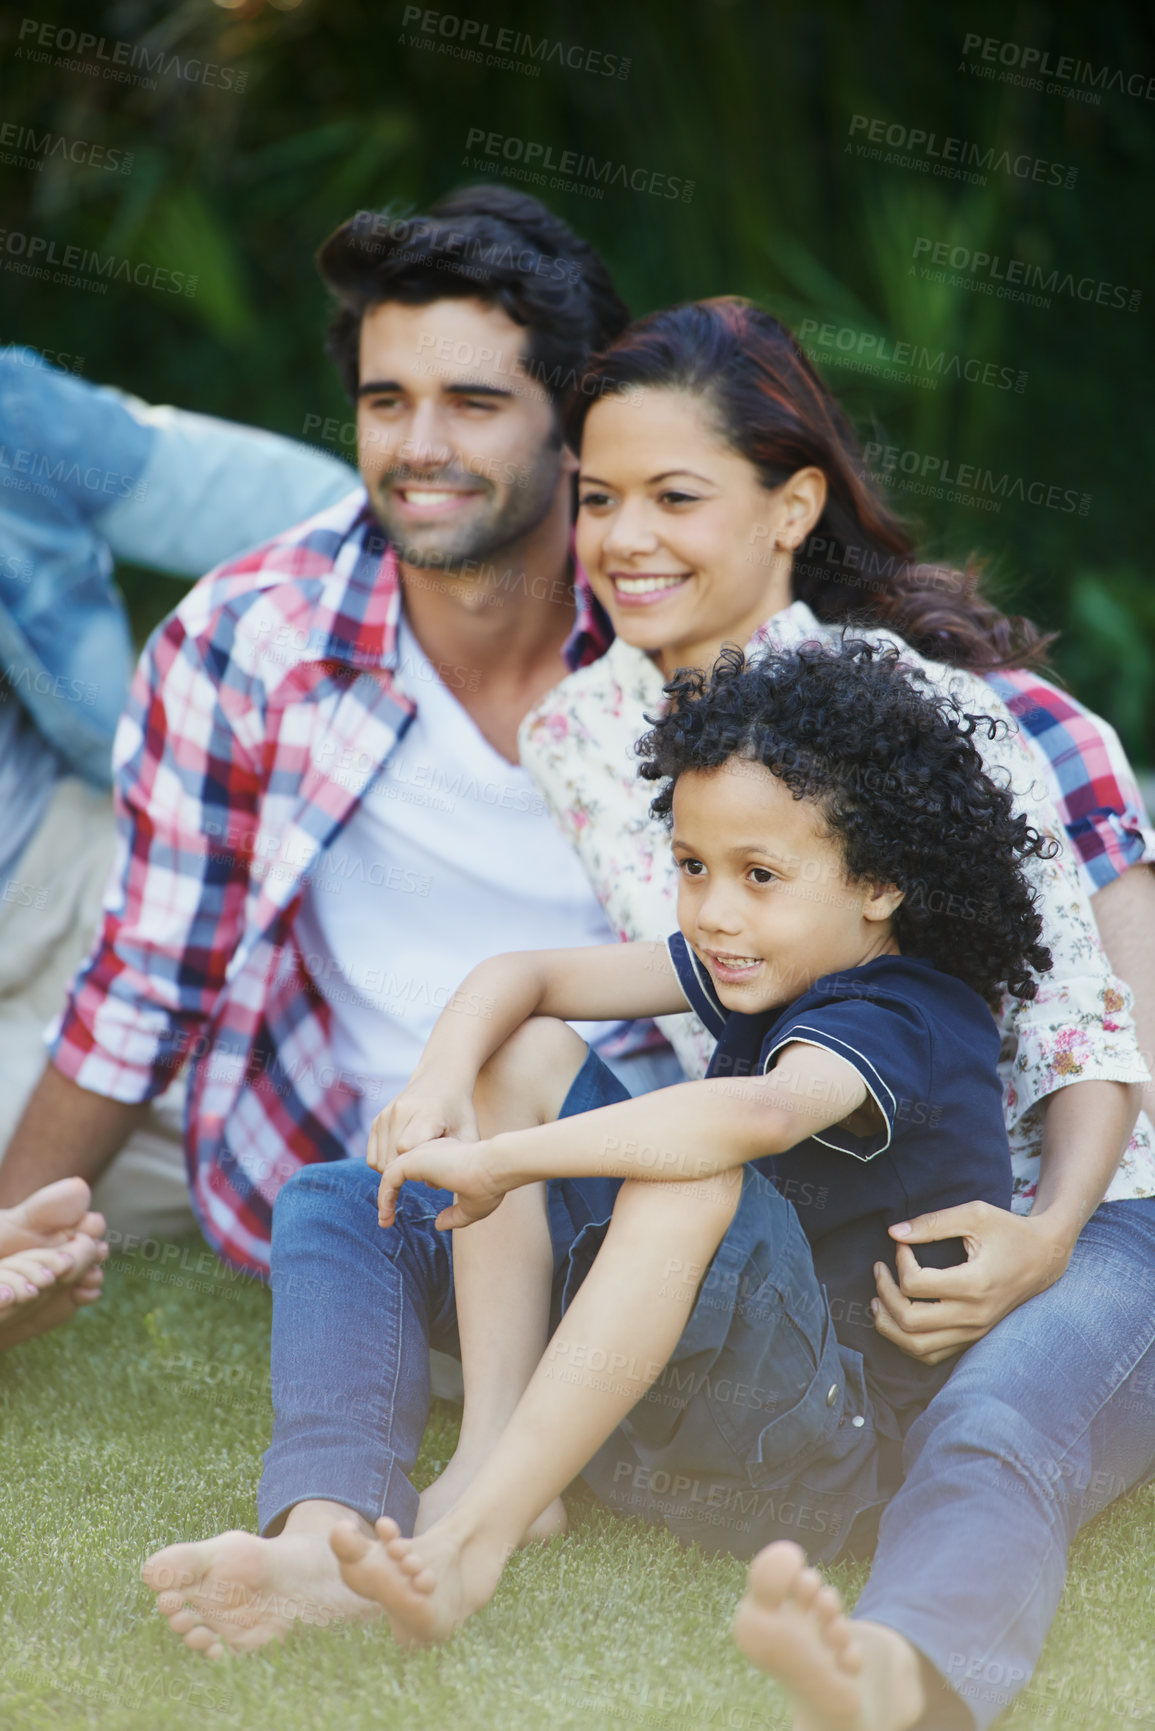 Buy stock photo Shot of a young family enjoying some time outdoors
